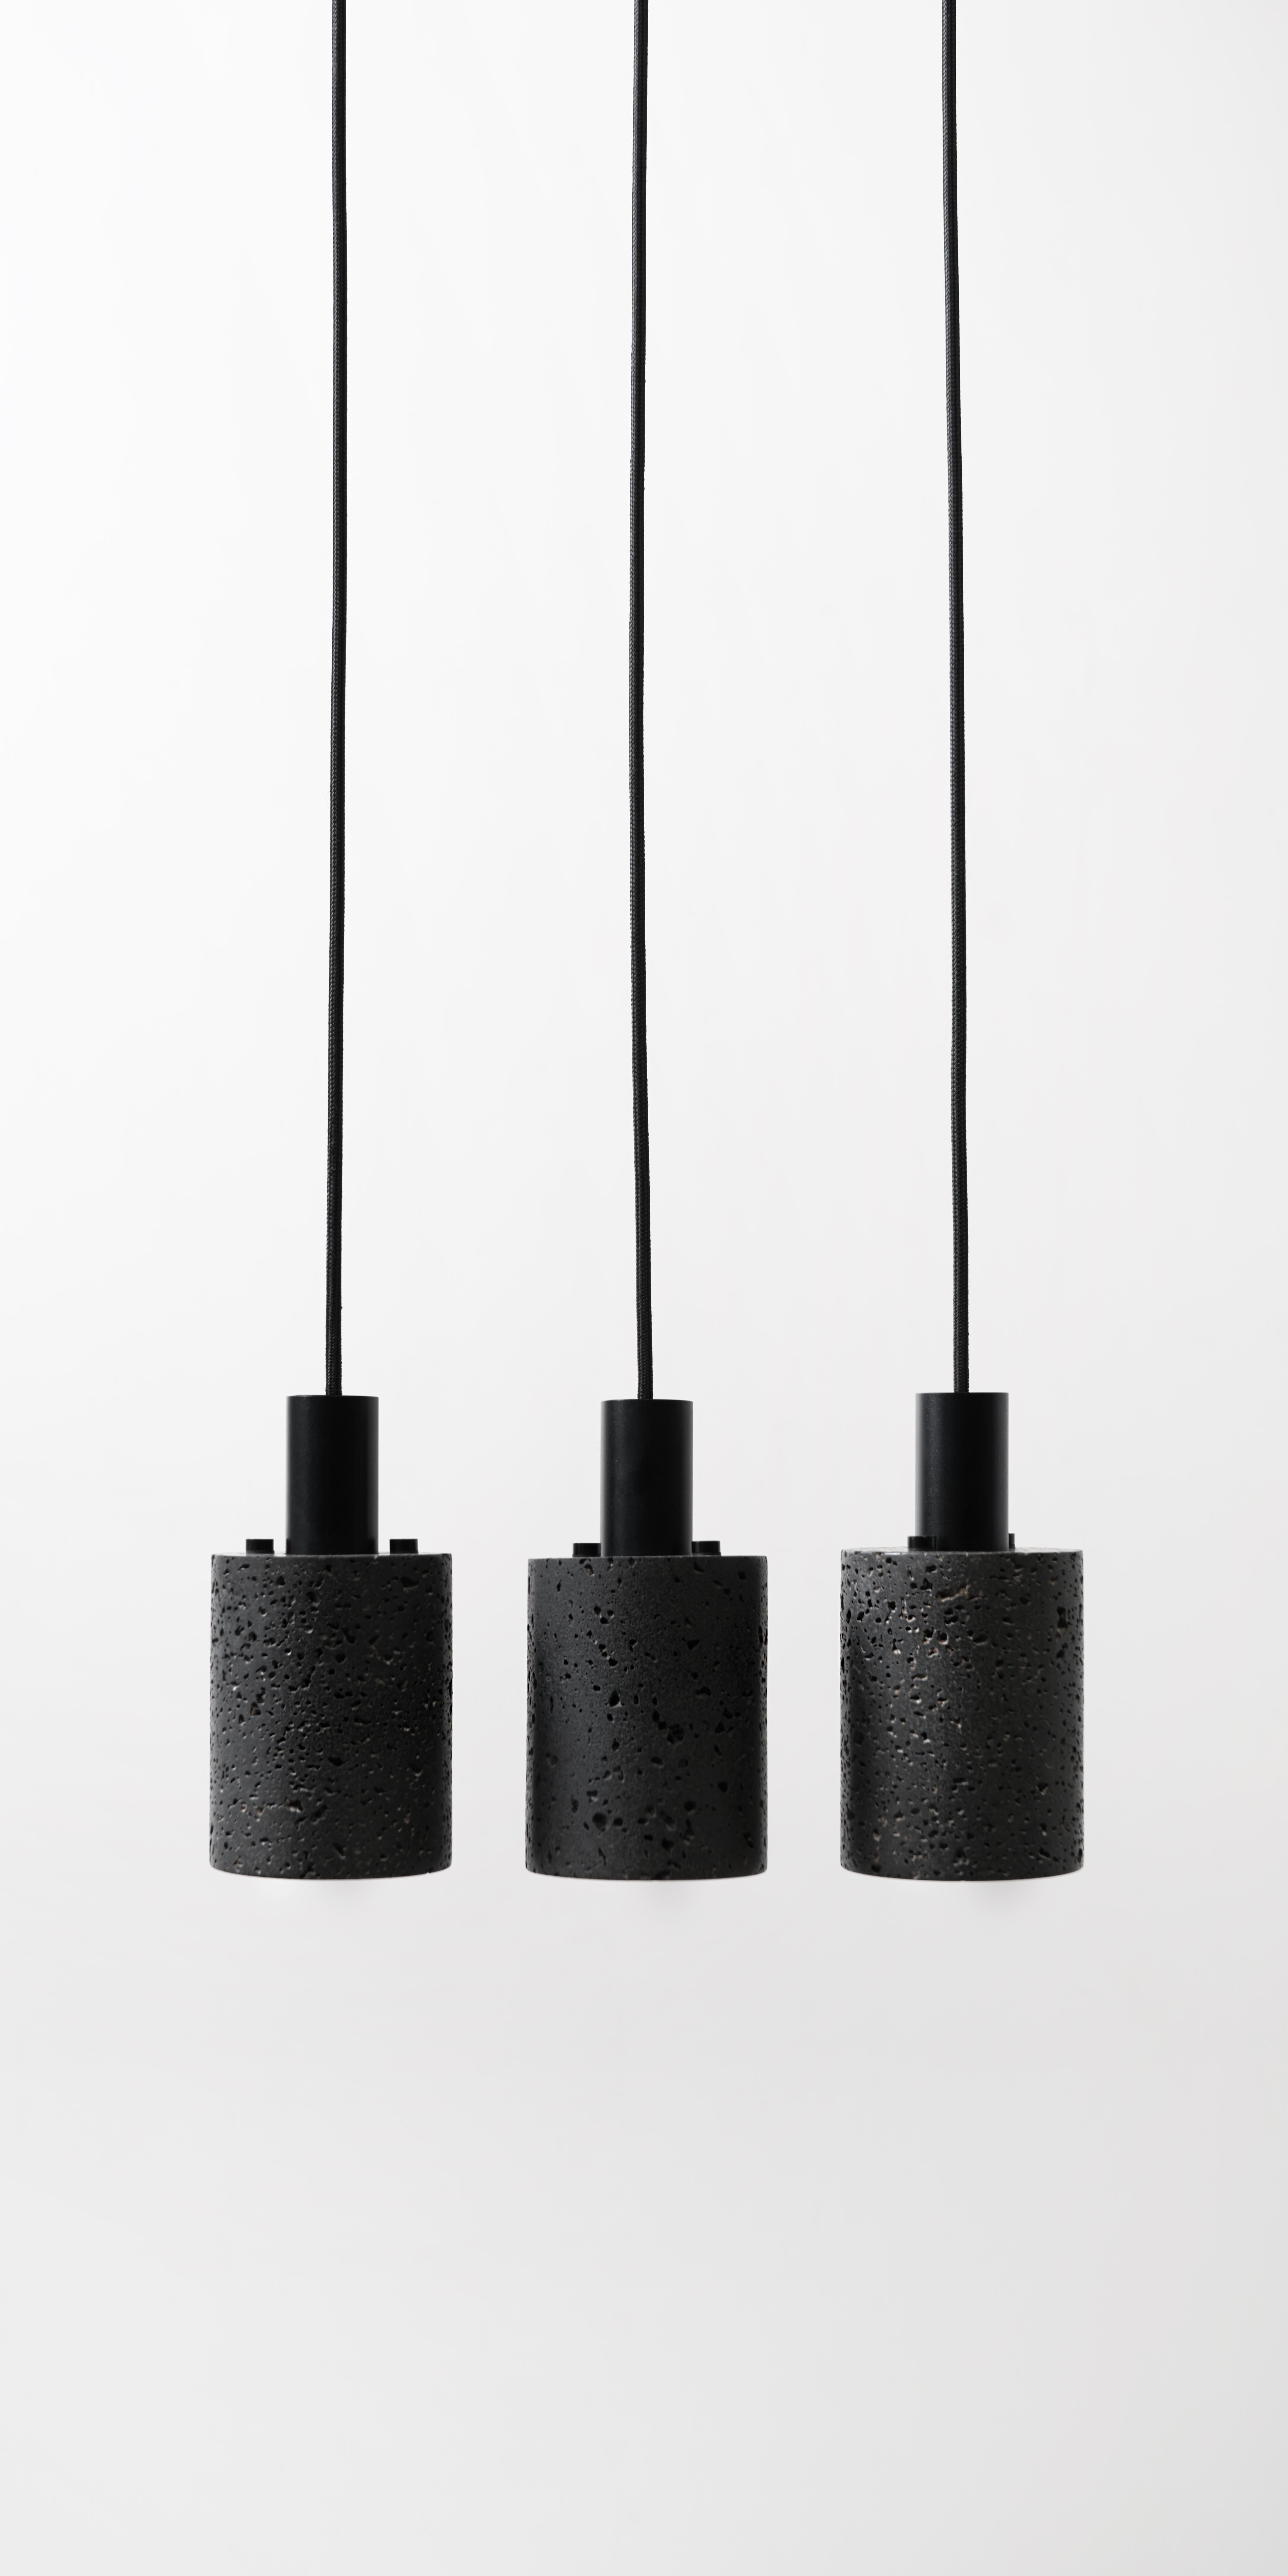 Chinese Lava Stone and Aluminum Pendant Light, “N, ” by Buzao